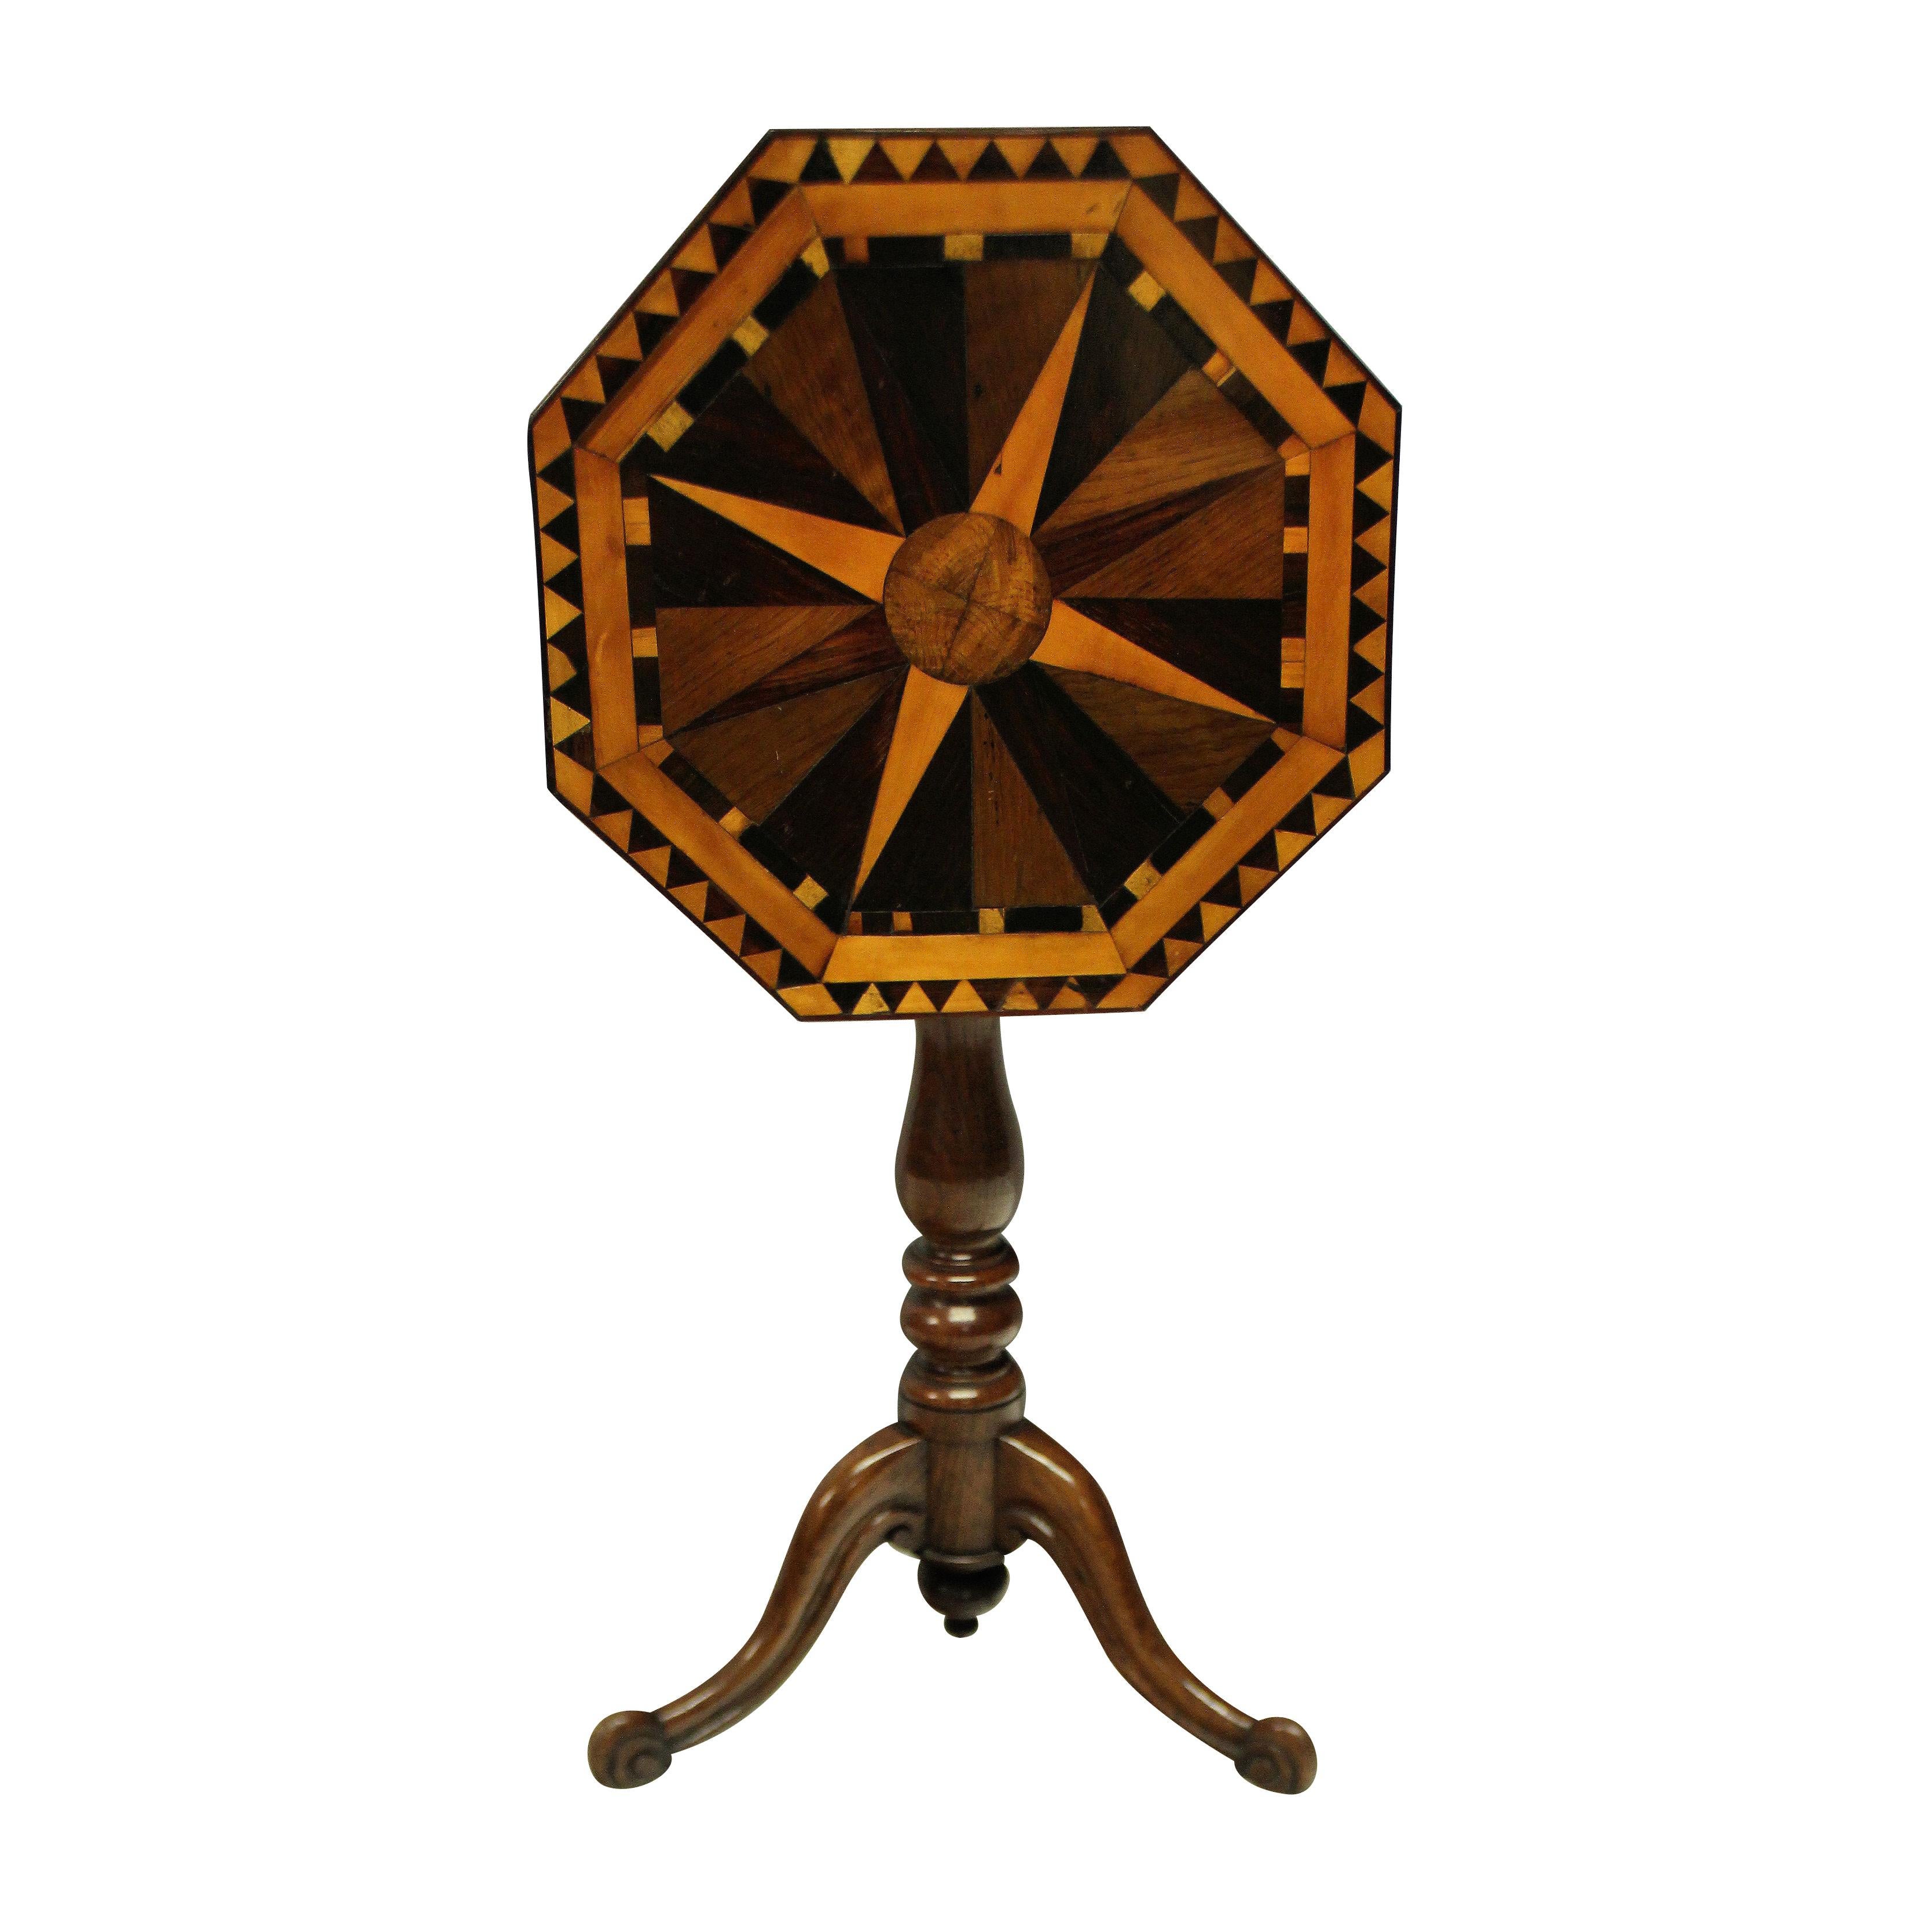 An English pedestal tilt top side table in oak and elm with a fine geometric marquetry top in various English woods depicting a globe and compass. The turned tripod base supporting a tilt top with scalloped apron with original latch.